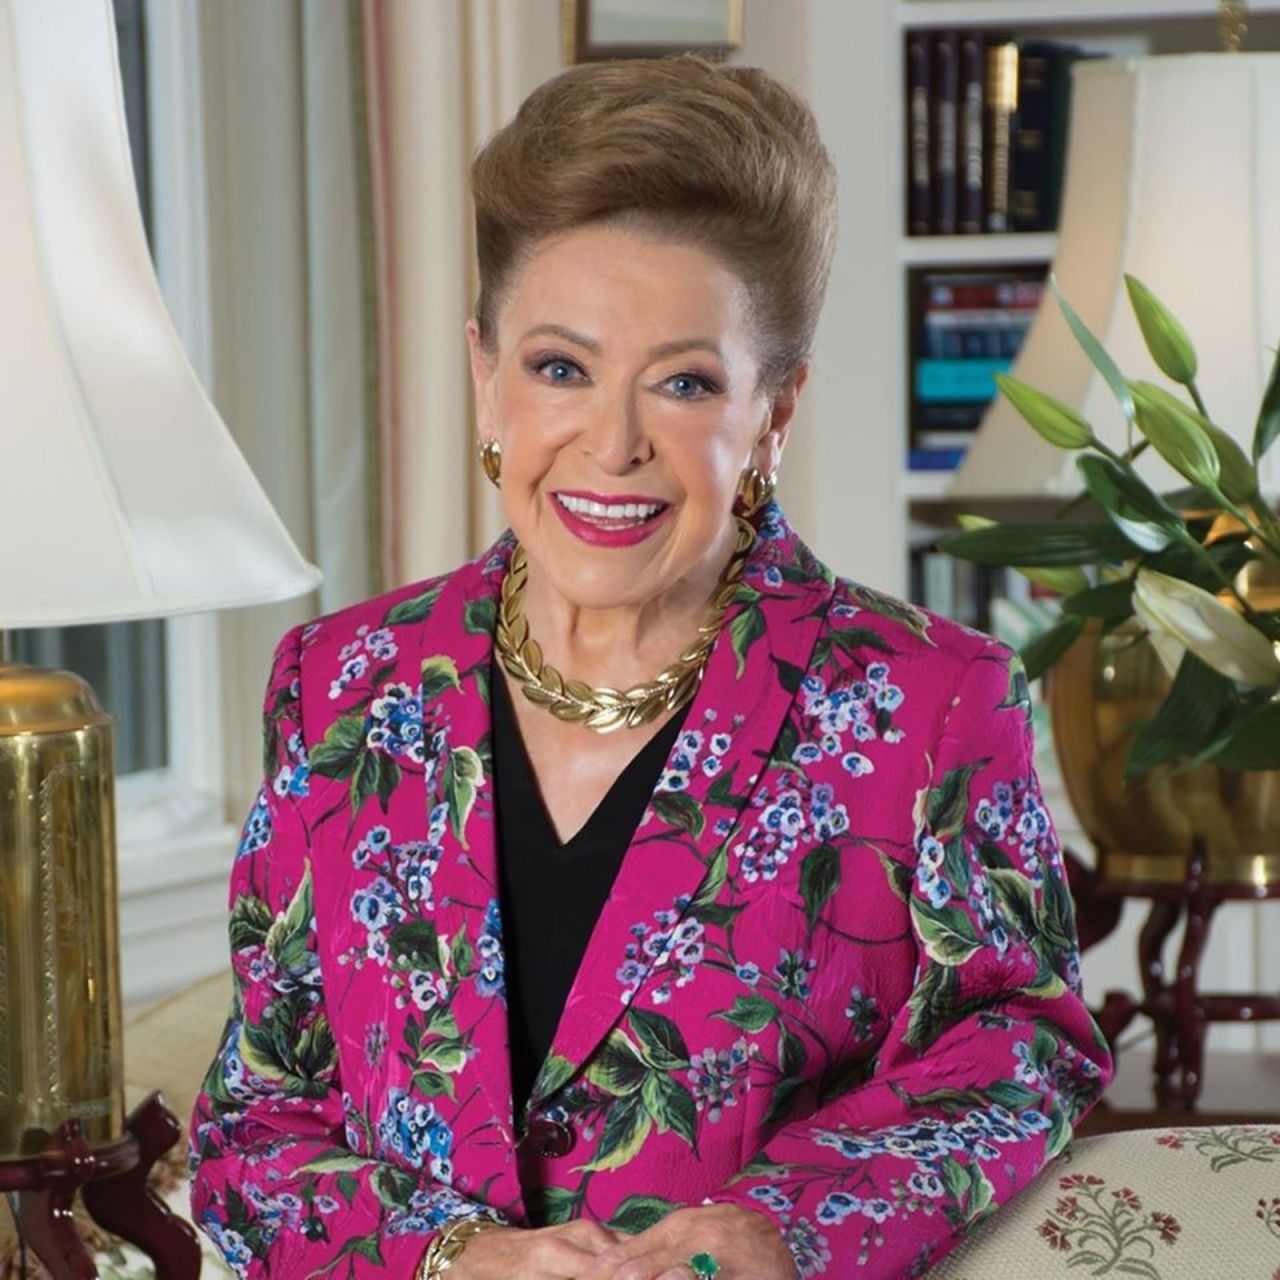 <a href="https://www.cnn.com/2020/01/31/us/mary-higgins-clark-dead/index.html" target="_blank">Mary Higgins Clark</a>, the bestselling "Queen of Suspense" who wrote dozens of suspense novels sold worldwide, died January 31 at age 92, Clark's publisher confirmed on Twitter. Clark's writing career spanned decades and included bestselling titles such as "Loves Music, Loves to Dance" and "A Stranger Is Watching."